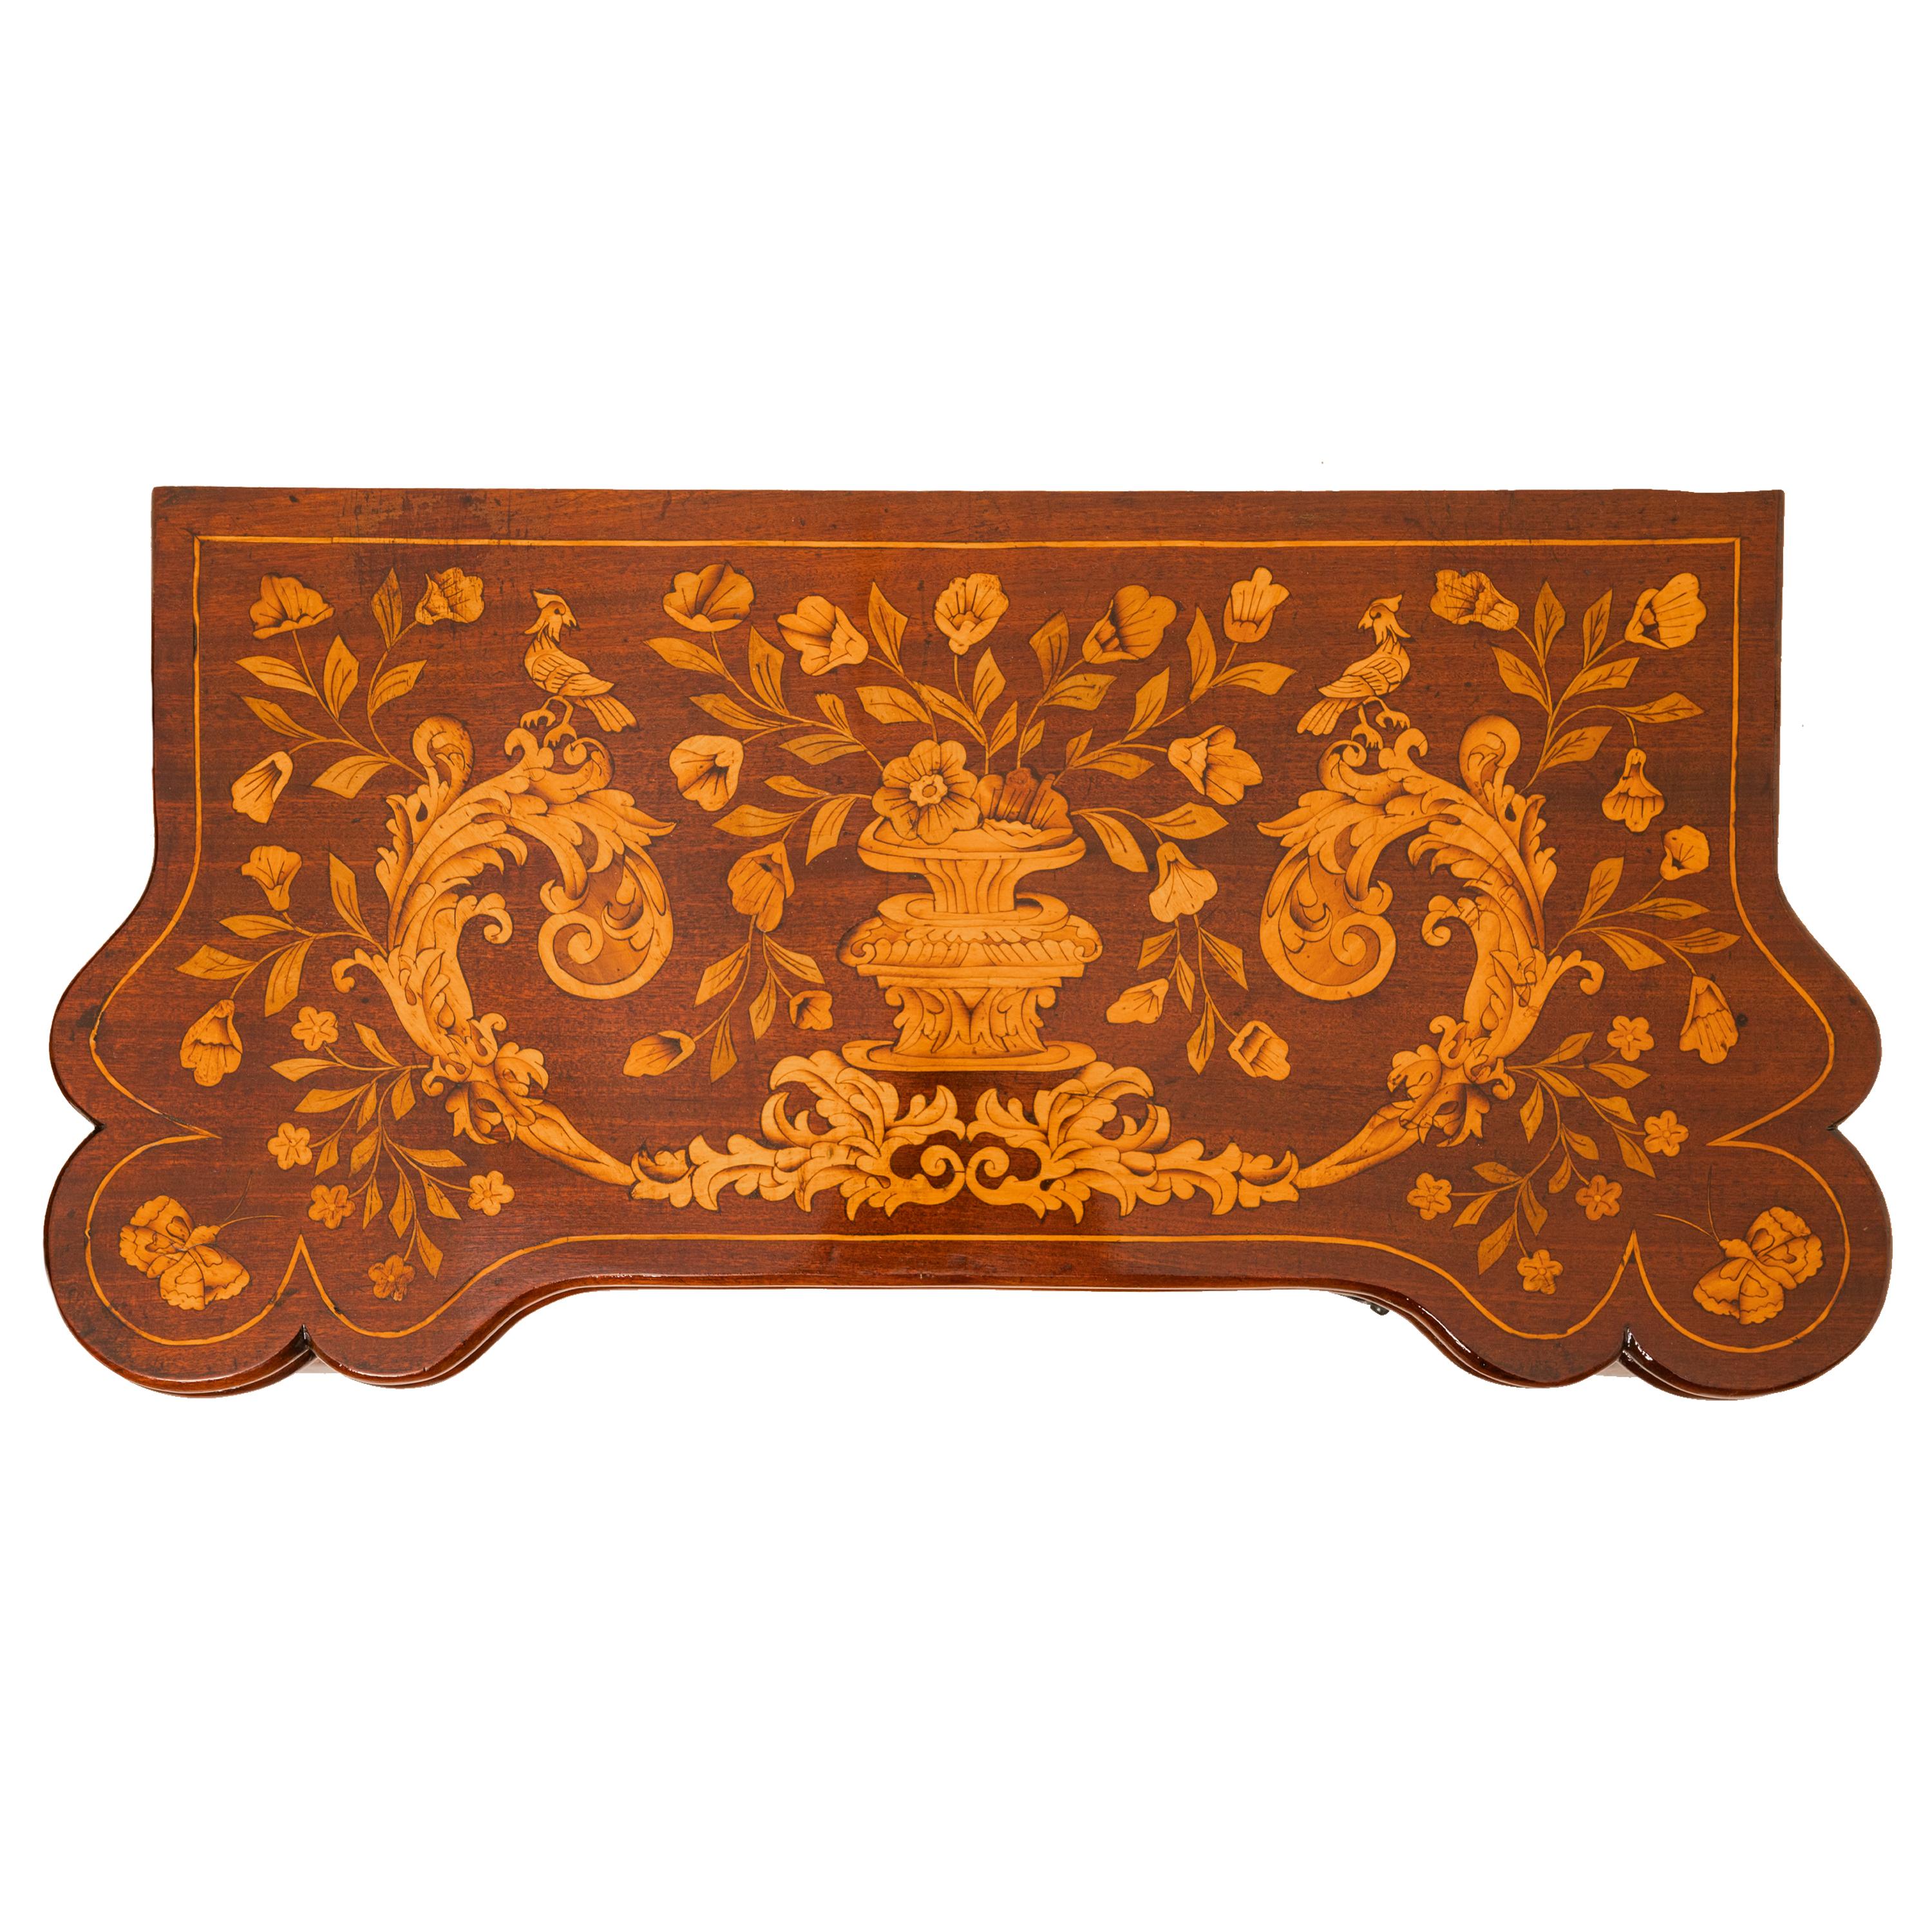 Pair Antique 19th Century Dutch Walnut Marquetry Card Game Console Tables 1820 For Sale 9